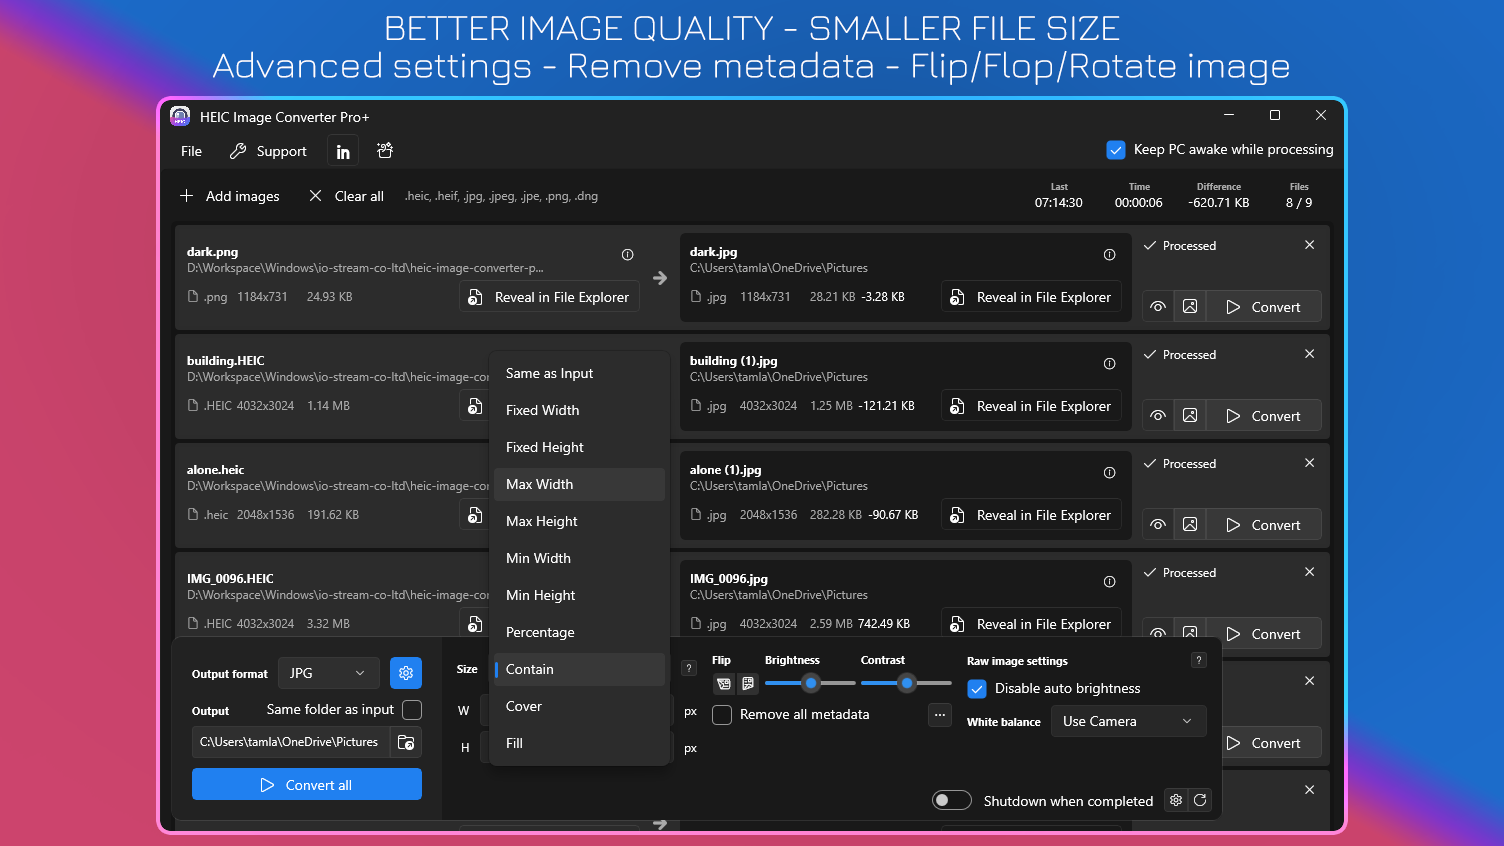 Better Image Quality - Smaller File Size - Advanced settings - Remove metadata - Flip/Flop/Rotate image